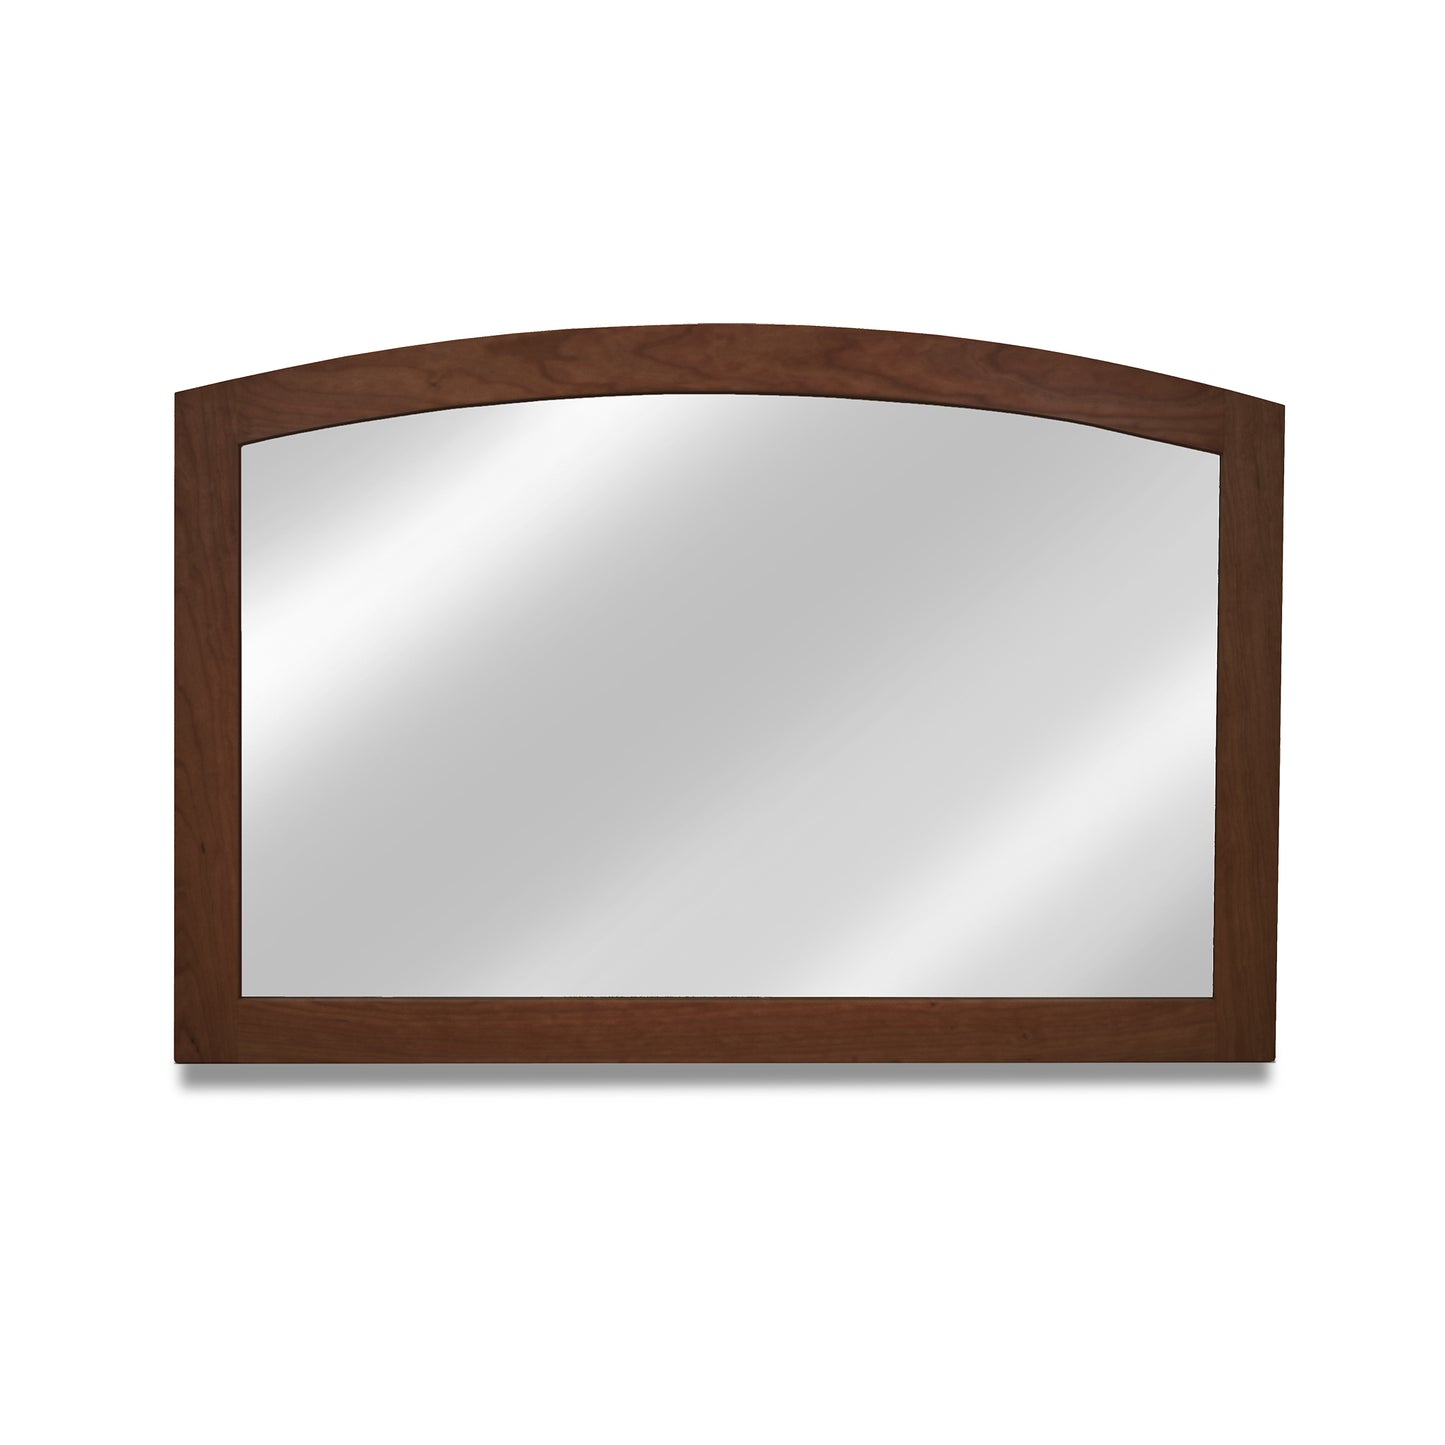 A Maple Corner Woodworks American Shaker Arched Mirror with a hardwood frame on a white background.